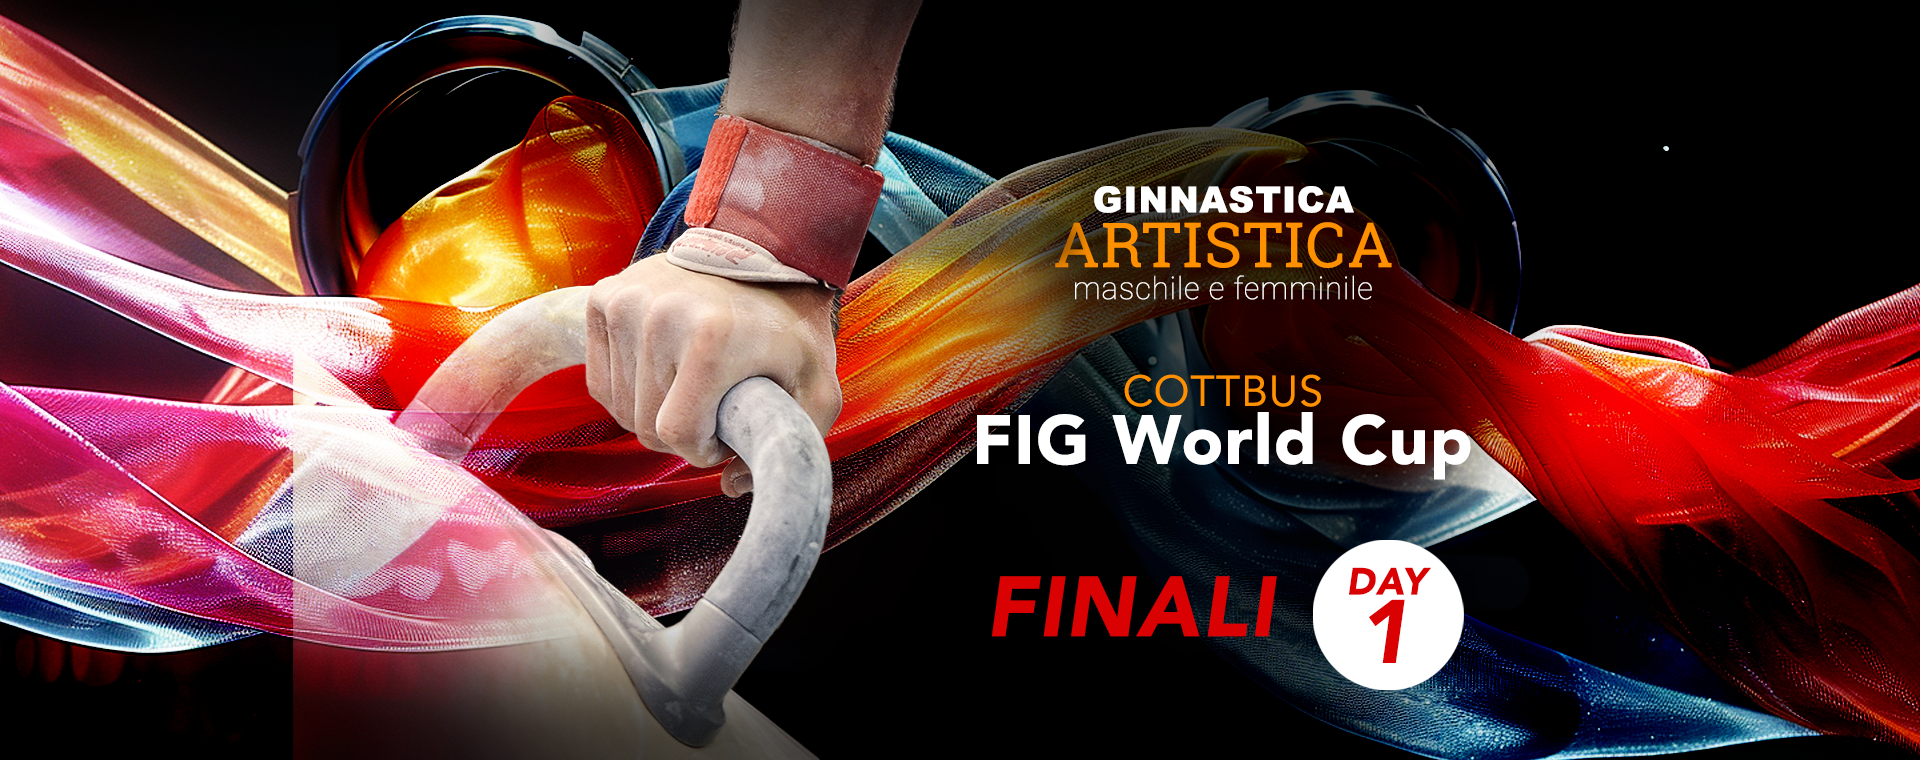 COTTBUS - FIG World Cup - Finals Day 1